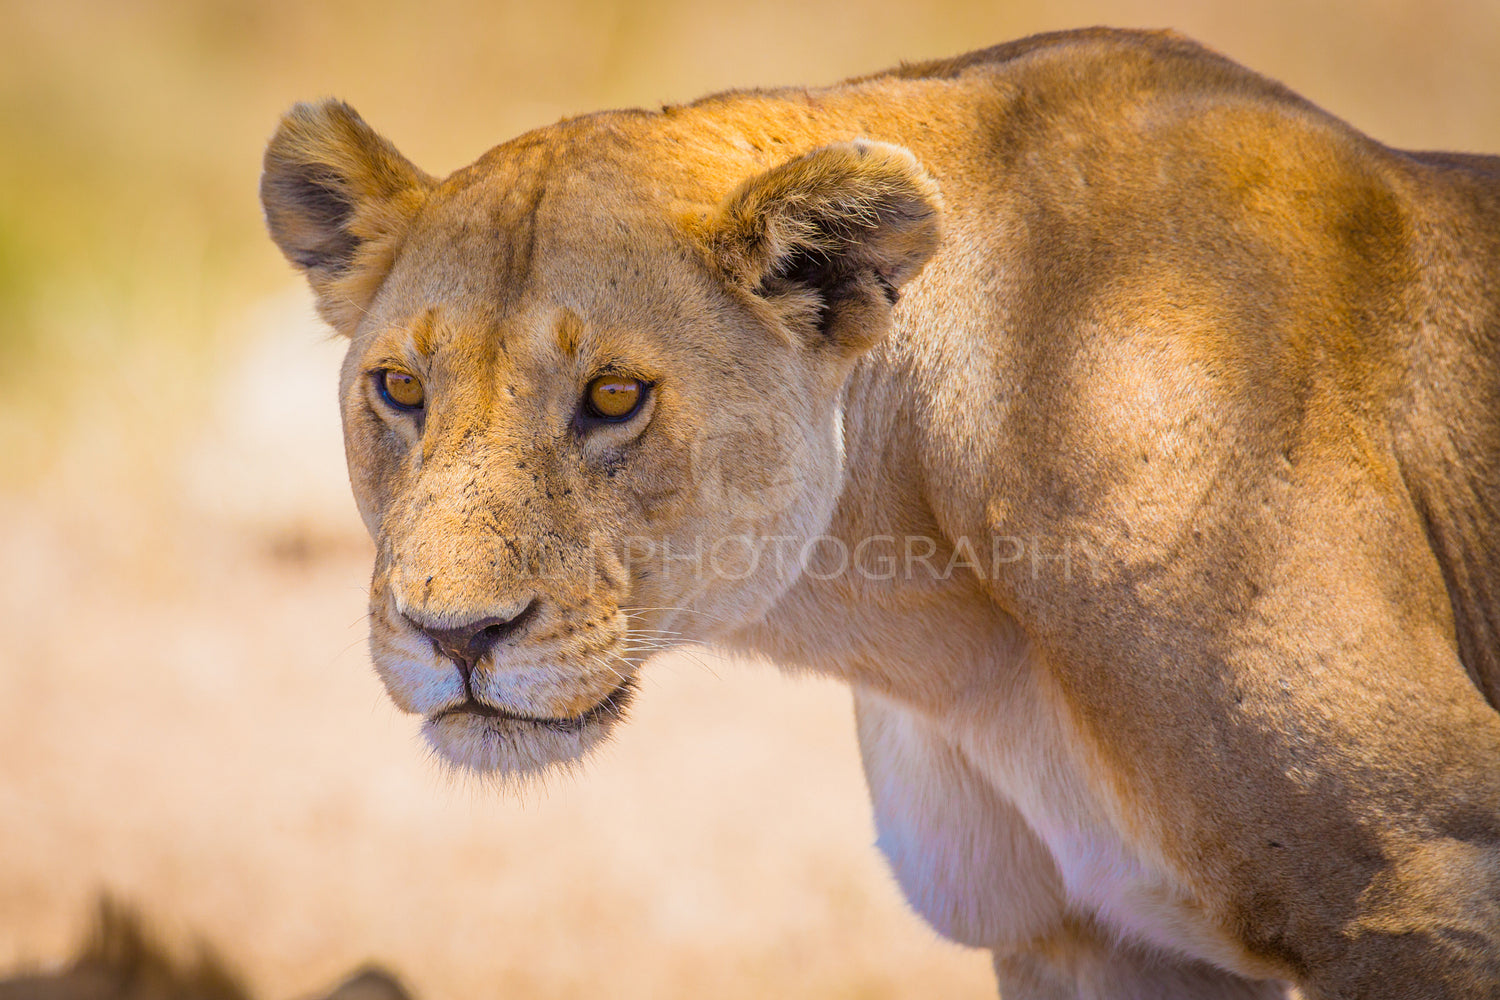 Close up of one large wild lioness in Africa